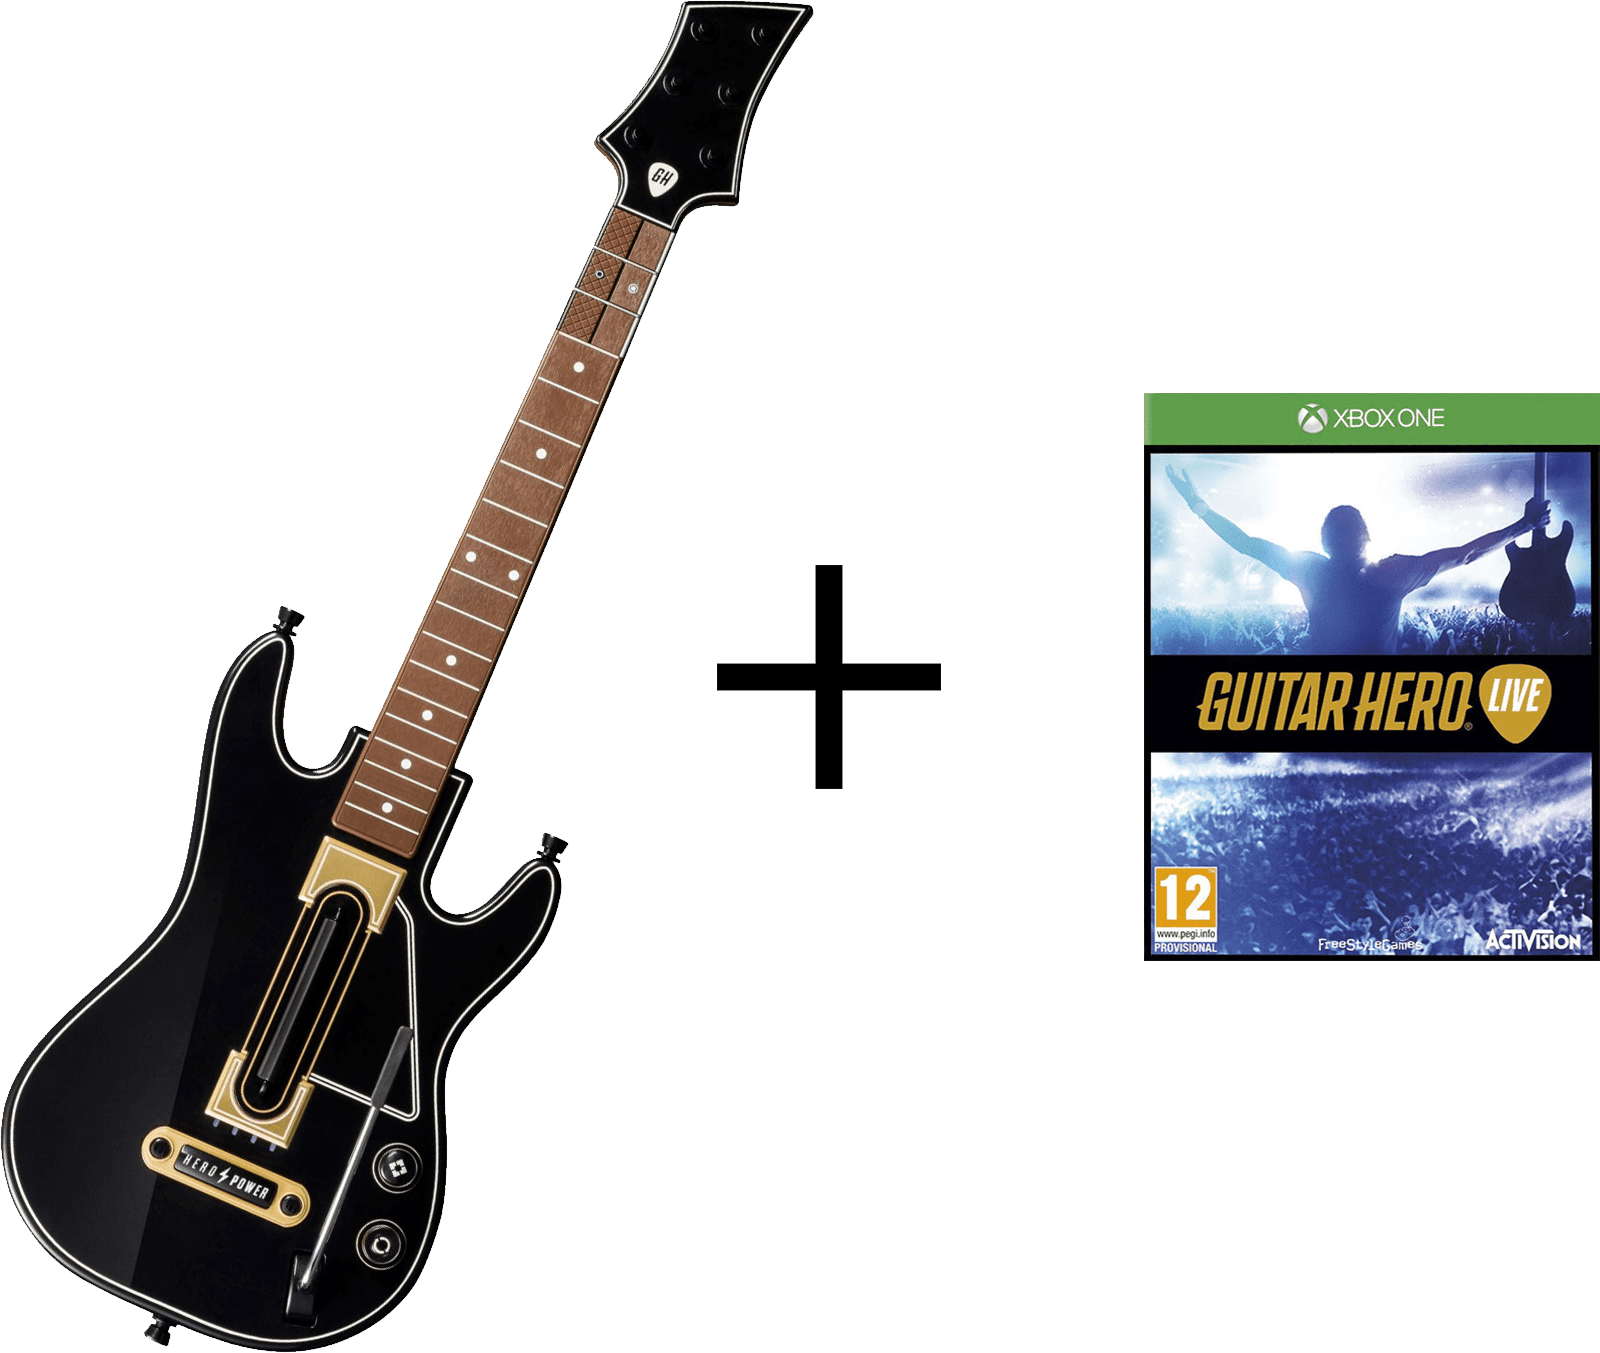 Guitar Hero Live Guitar Xbox One Pwned Buy From Pwned Games With Confidence Xbox One